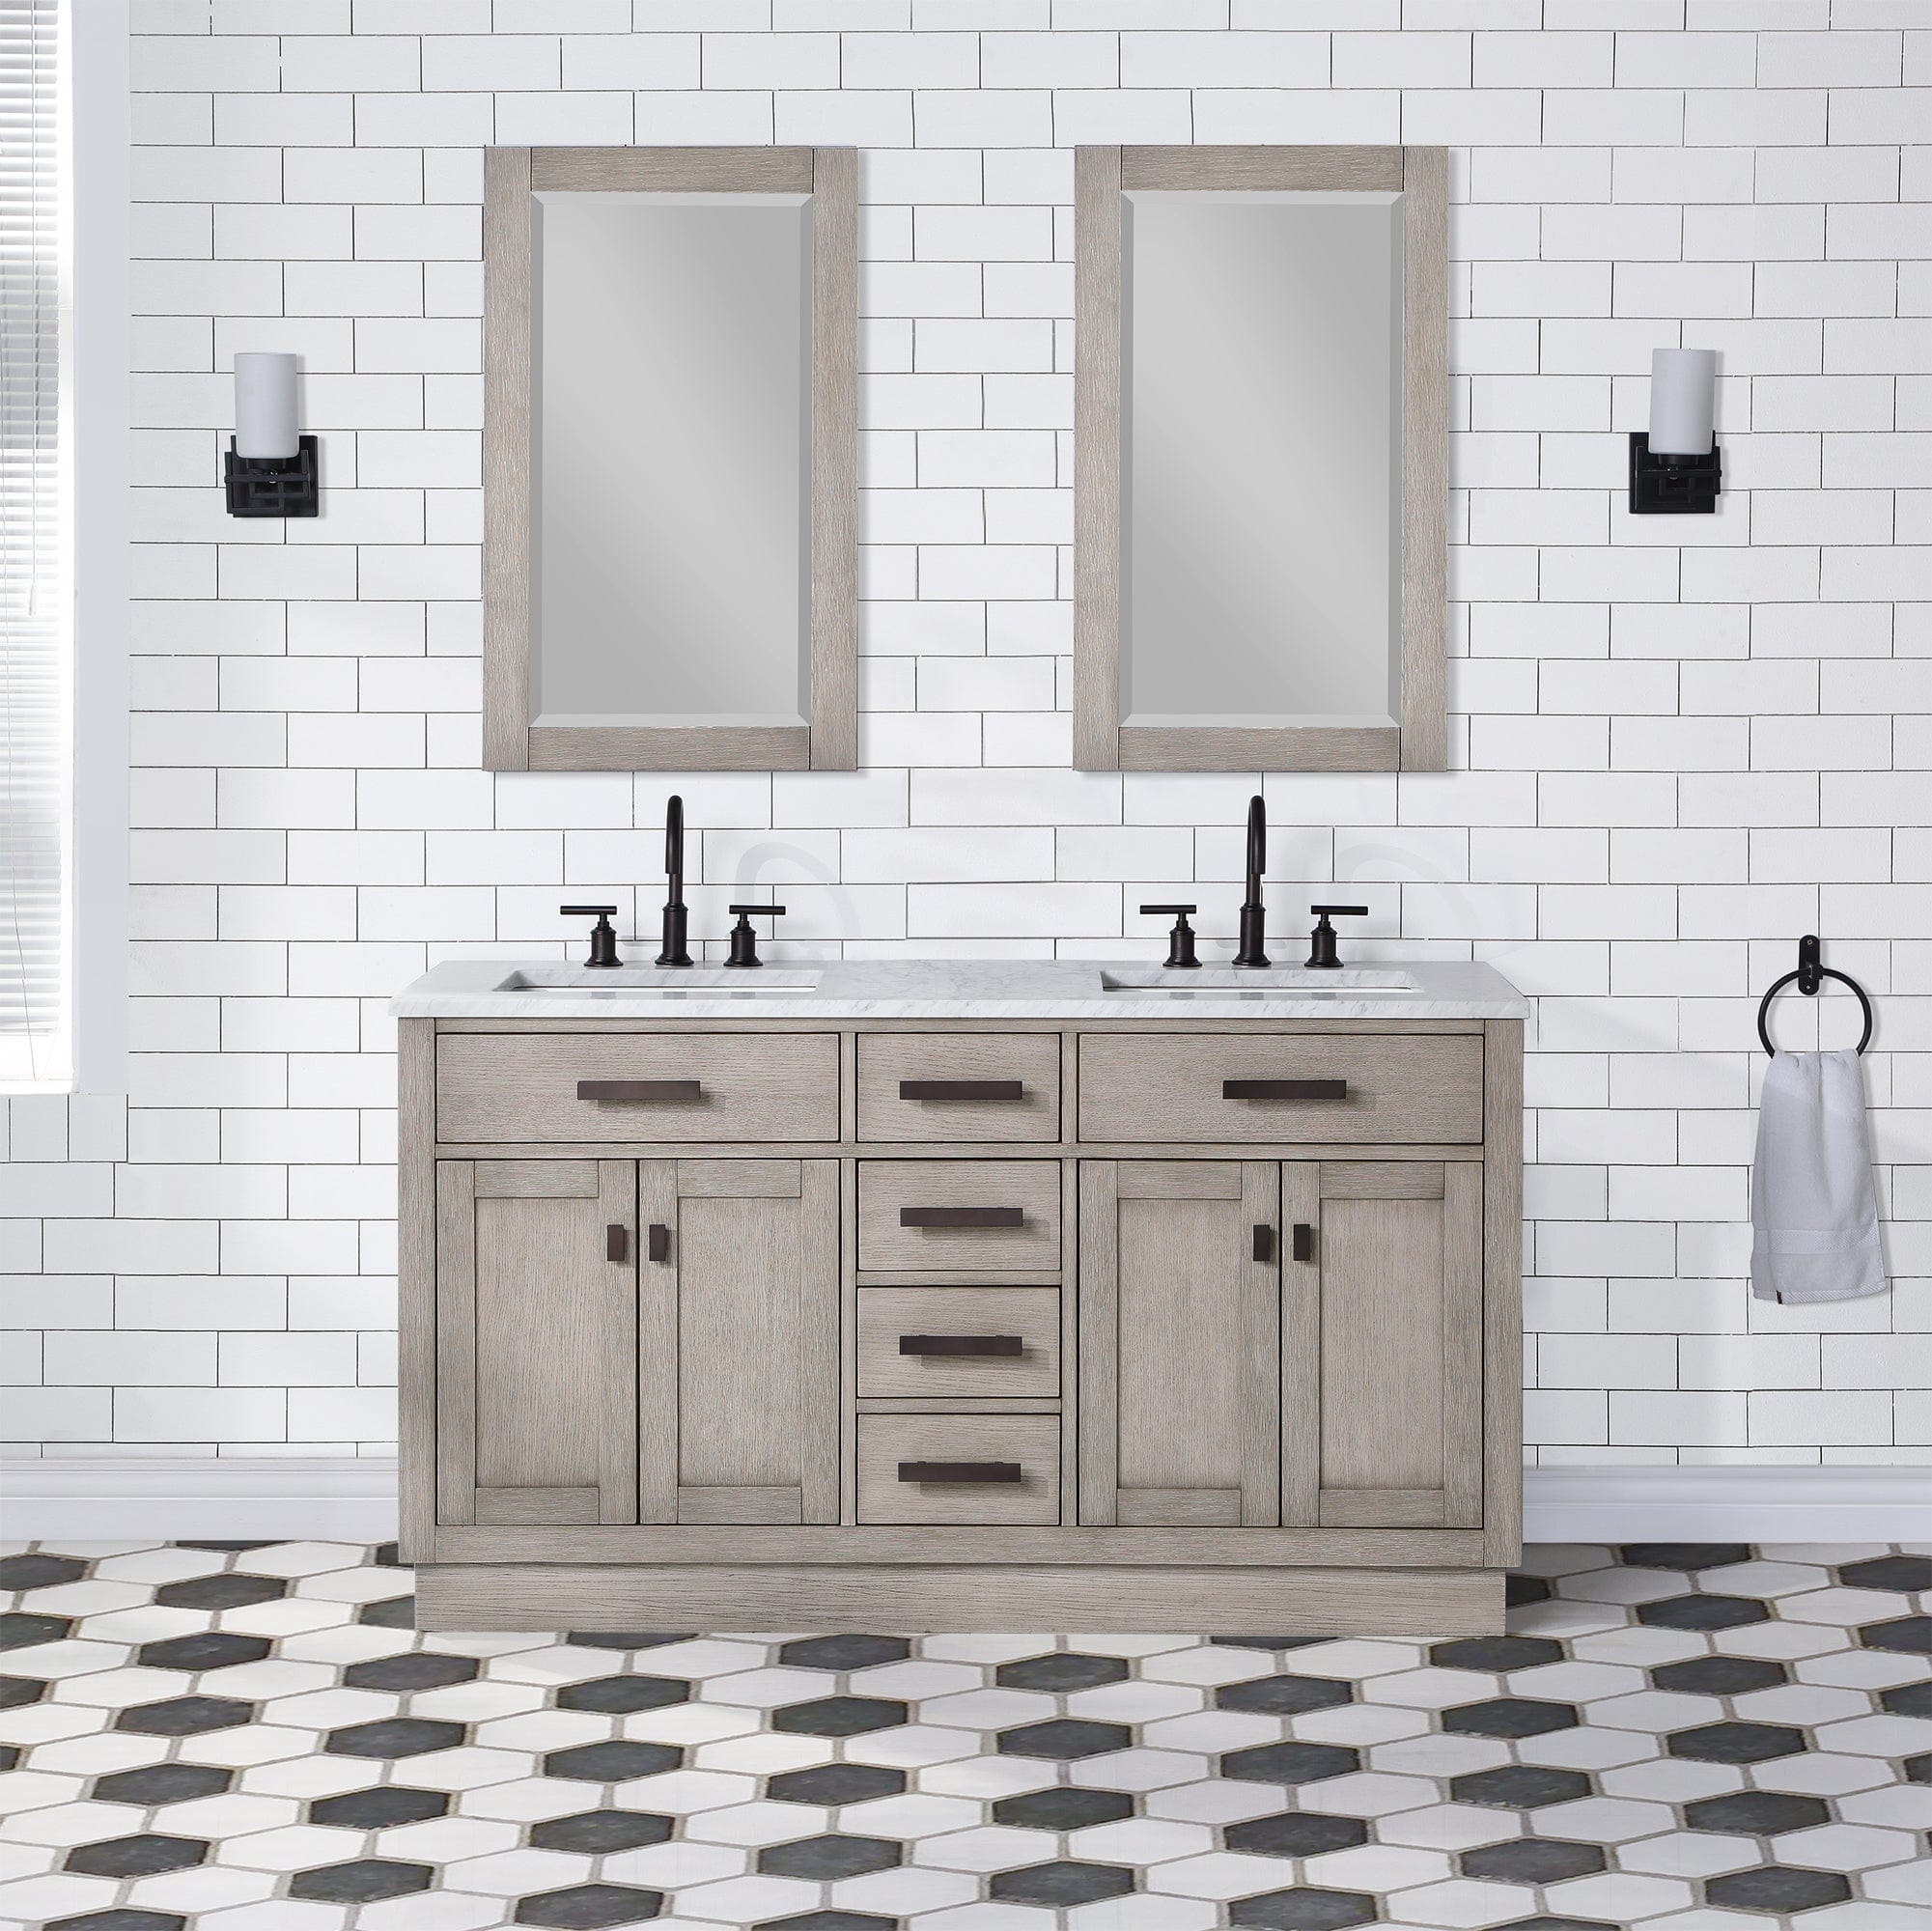 Chestnut 60 In. Double Sink Carrara White Marble Countertop Vanity In Grey Oak with Grooseneck Faucets and Mirrors - Molaix732030764835CH60CW03GK-R21BL1403